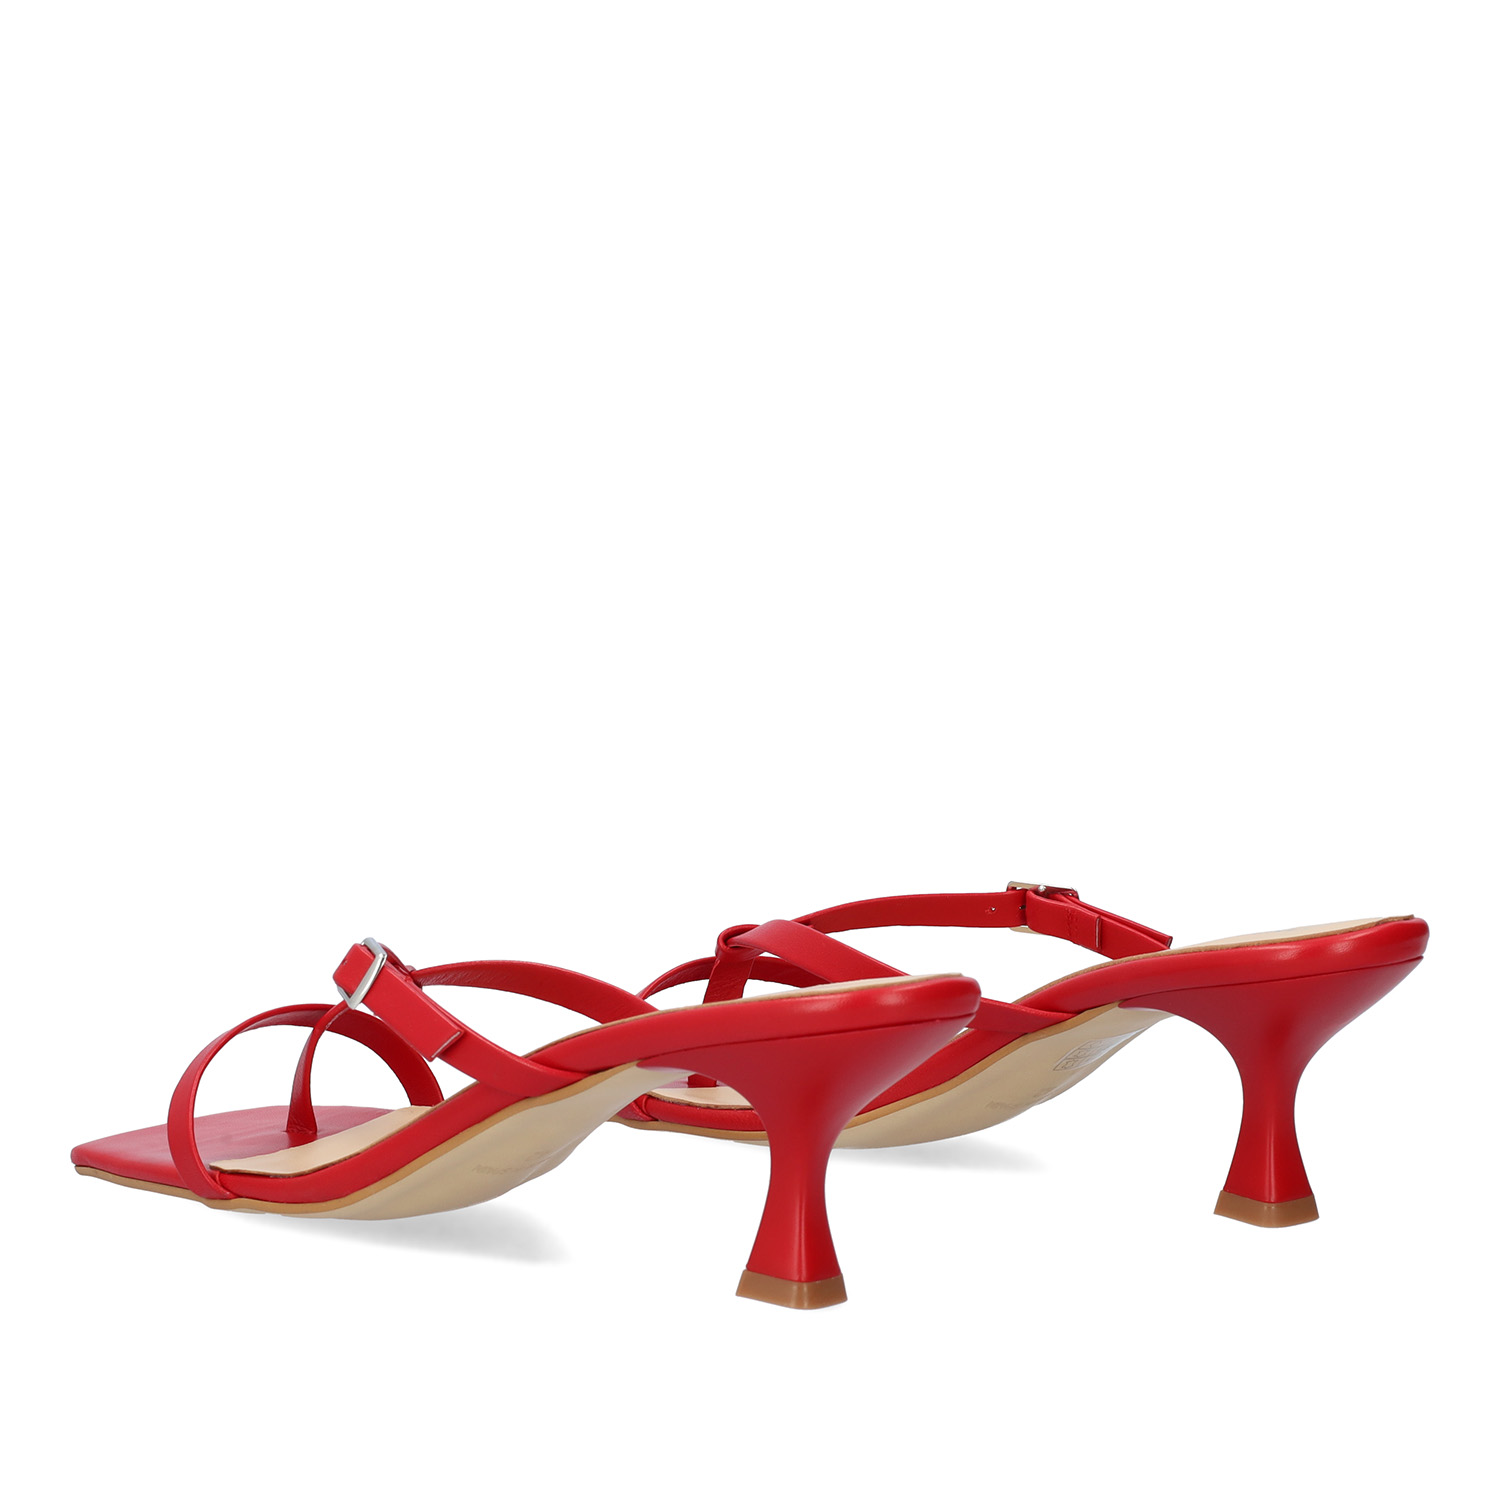 Red leather heeled sandals 